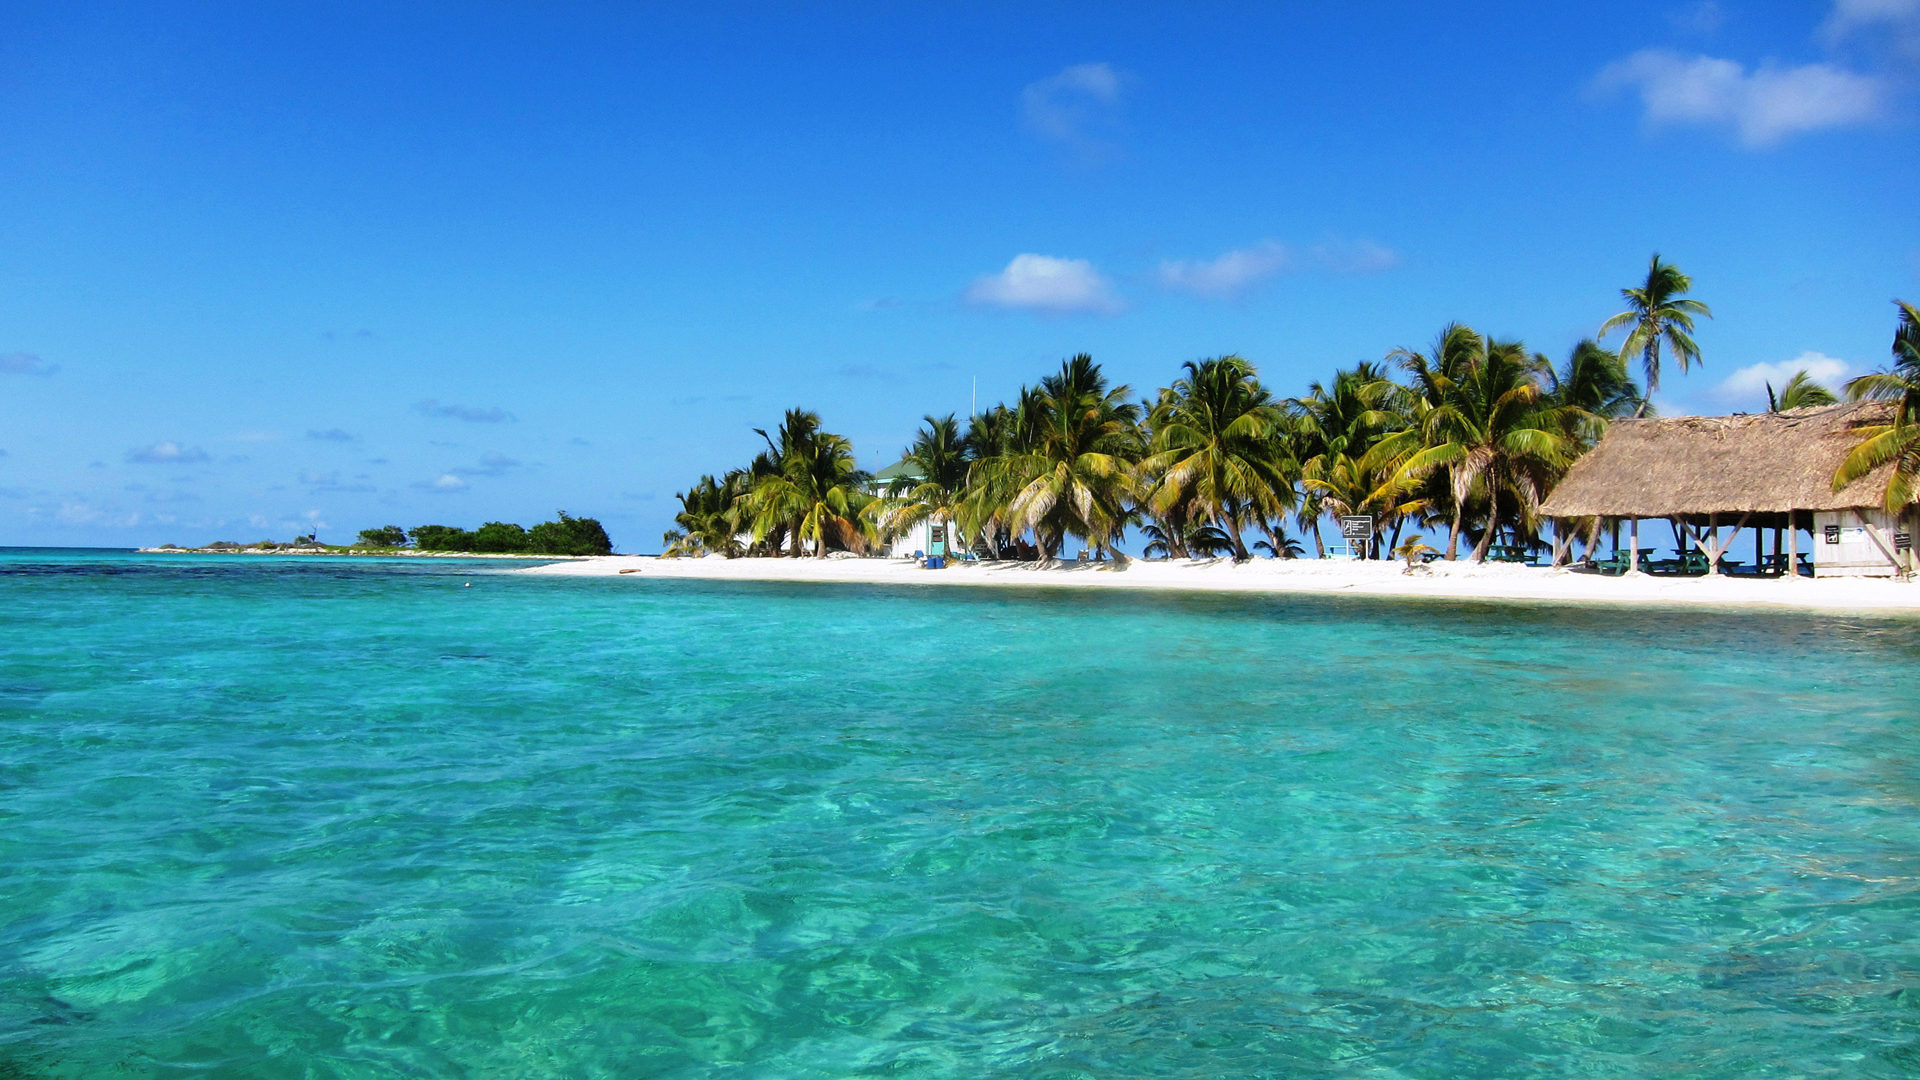 Buy Belize Land: A Paradise Investment Opportunity